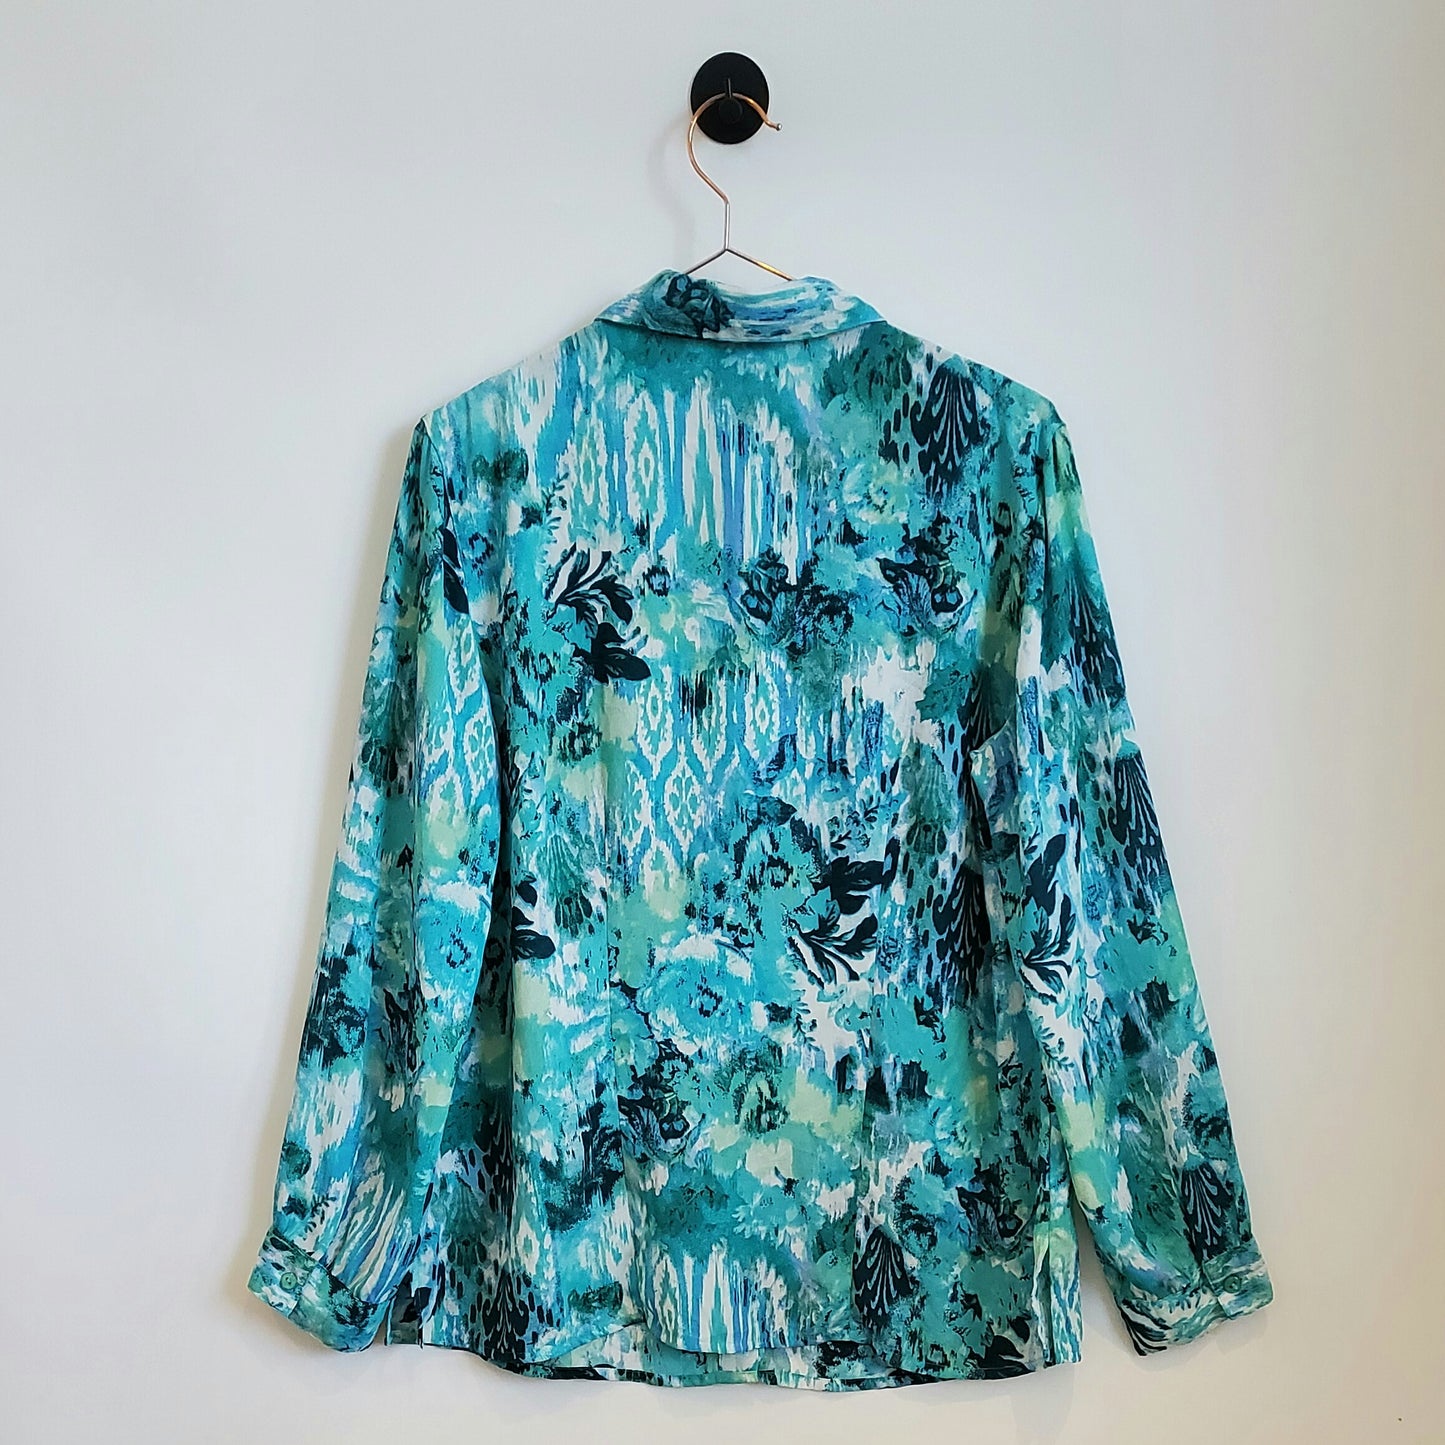 Vintage 90s Abstract Floral Chiffon Blouse | Size M